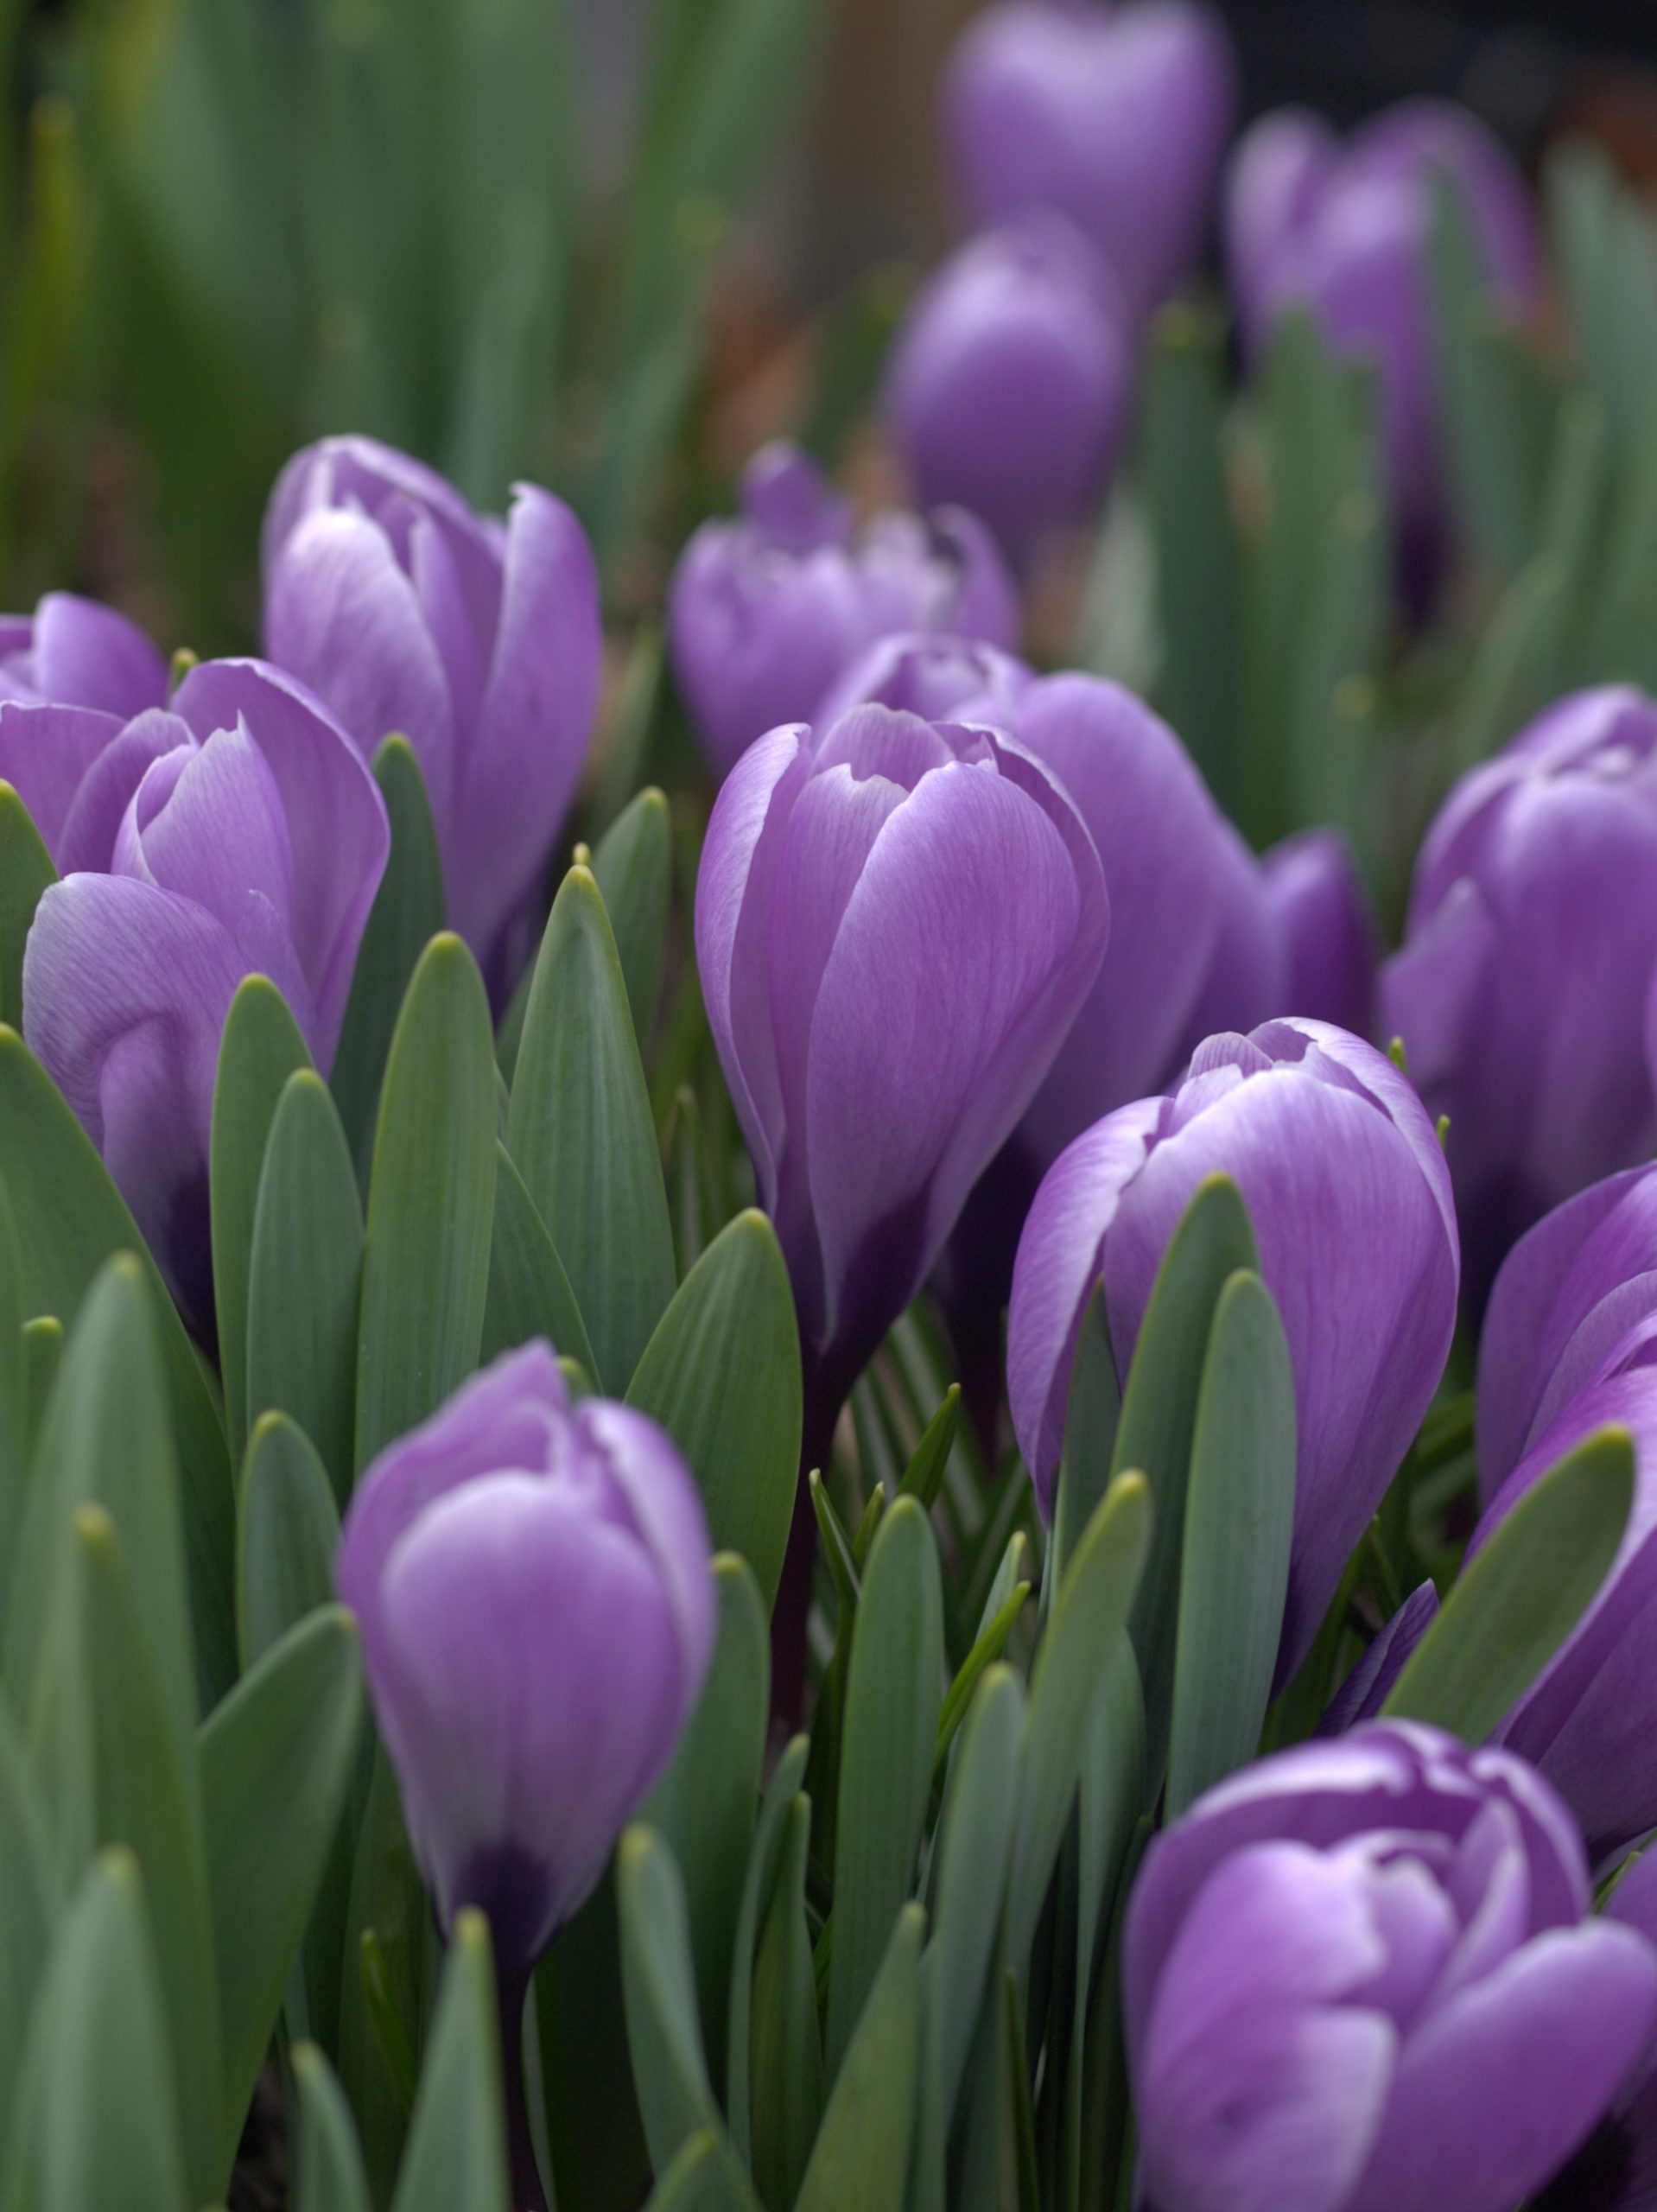 Another Bunch Of Purple Crocus (user submitted)